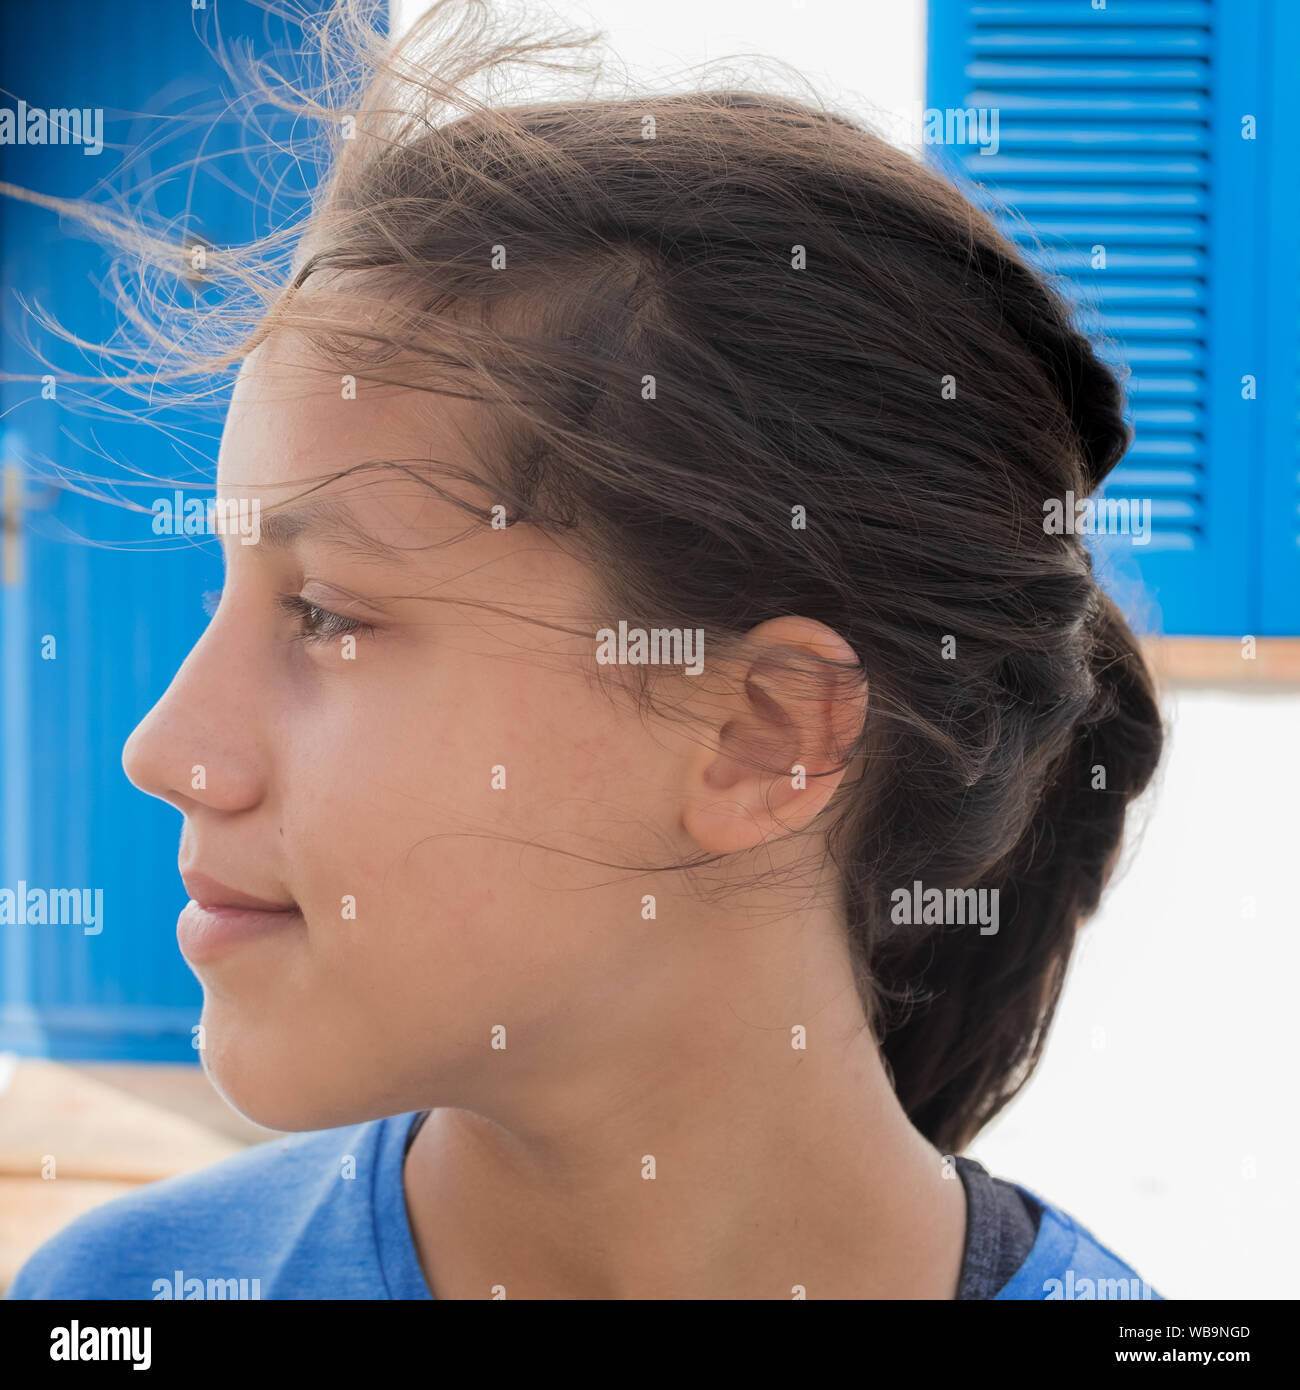 Close up profile of a cheerful young girl looking away with hair blowing in wind outdoors. Innocence and happiness concepts. Stock Photo